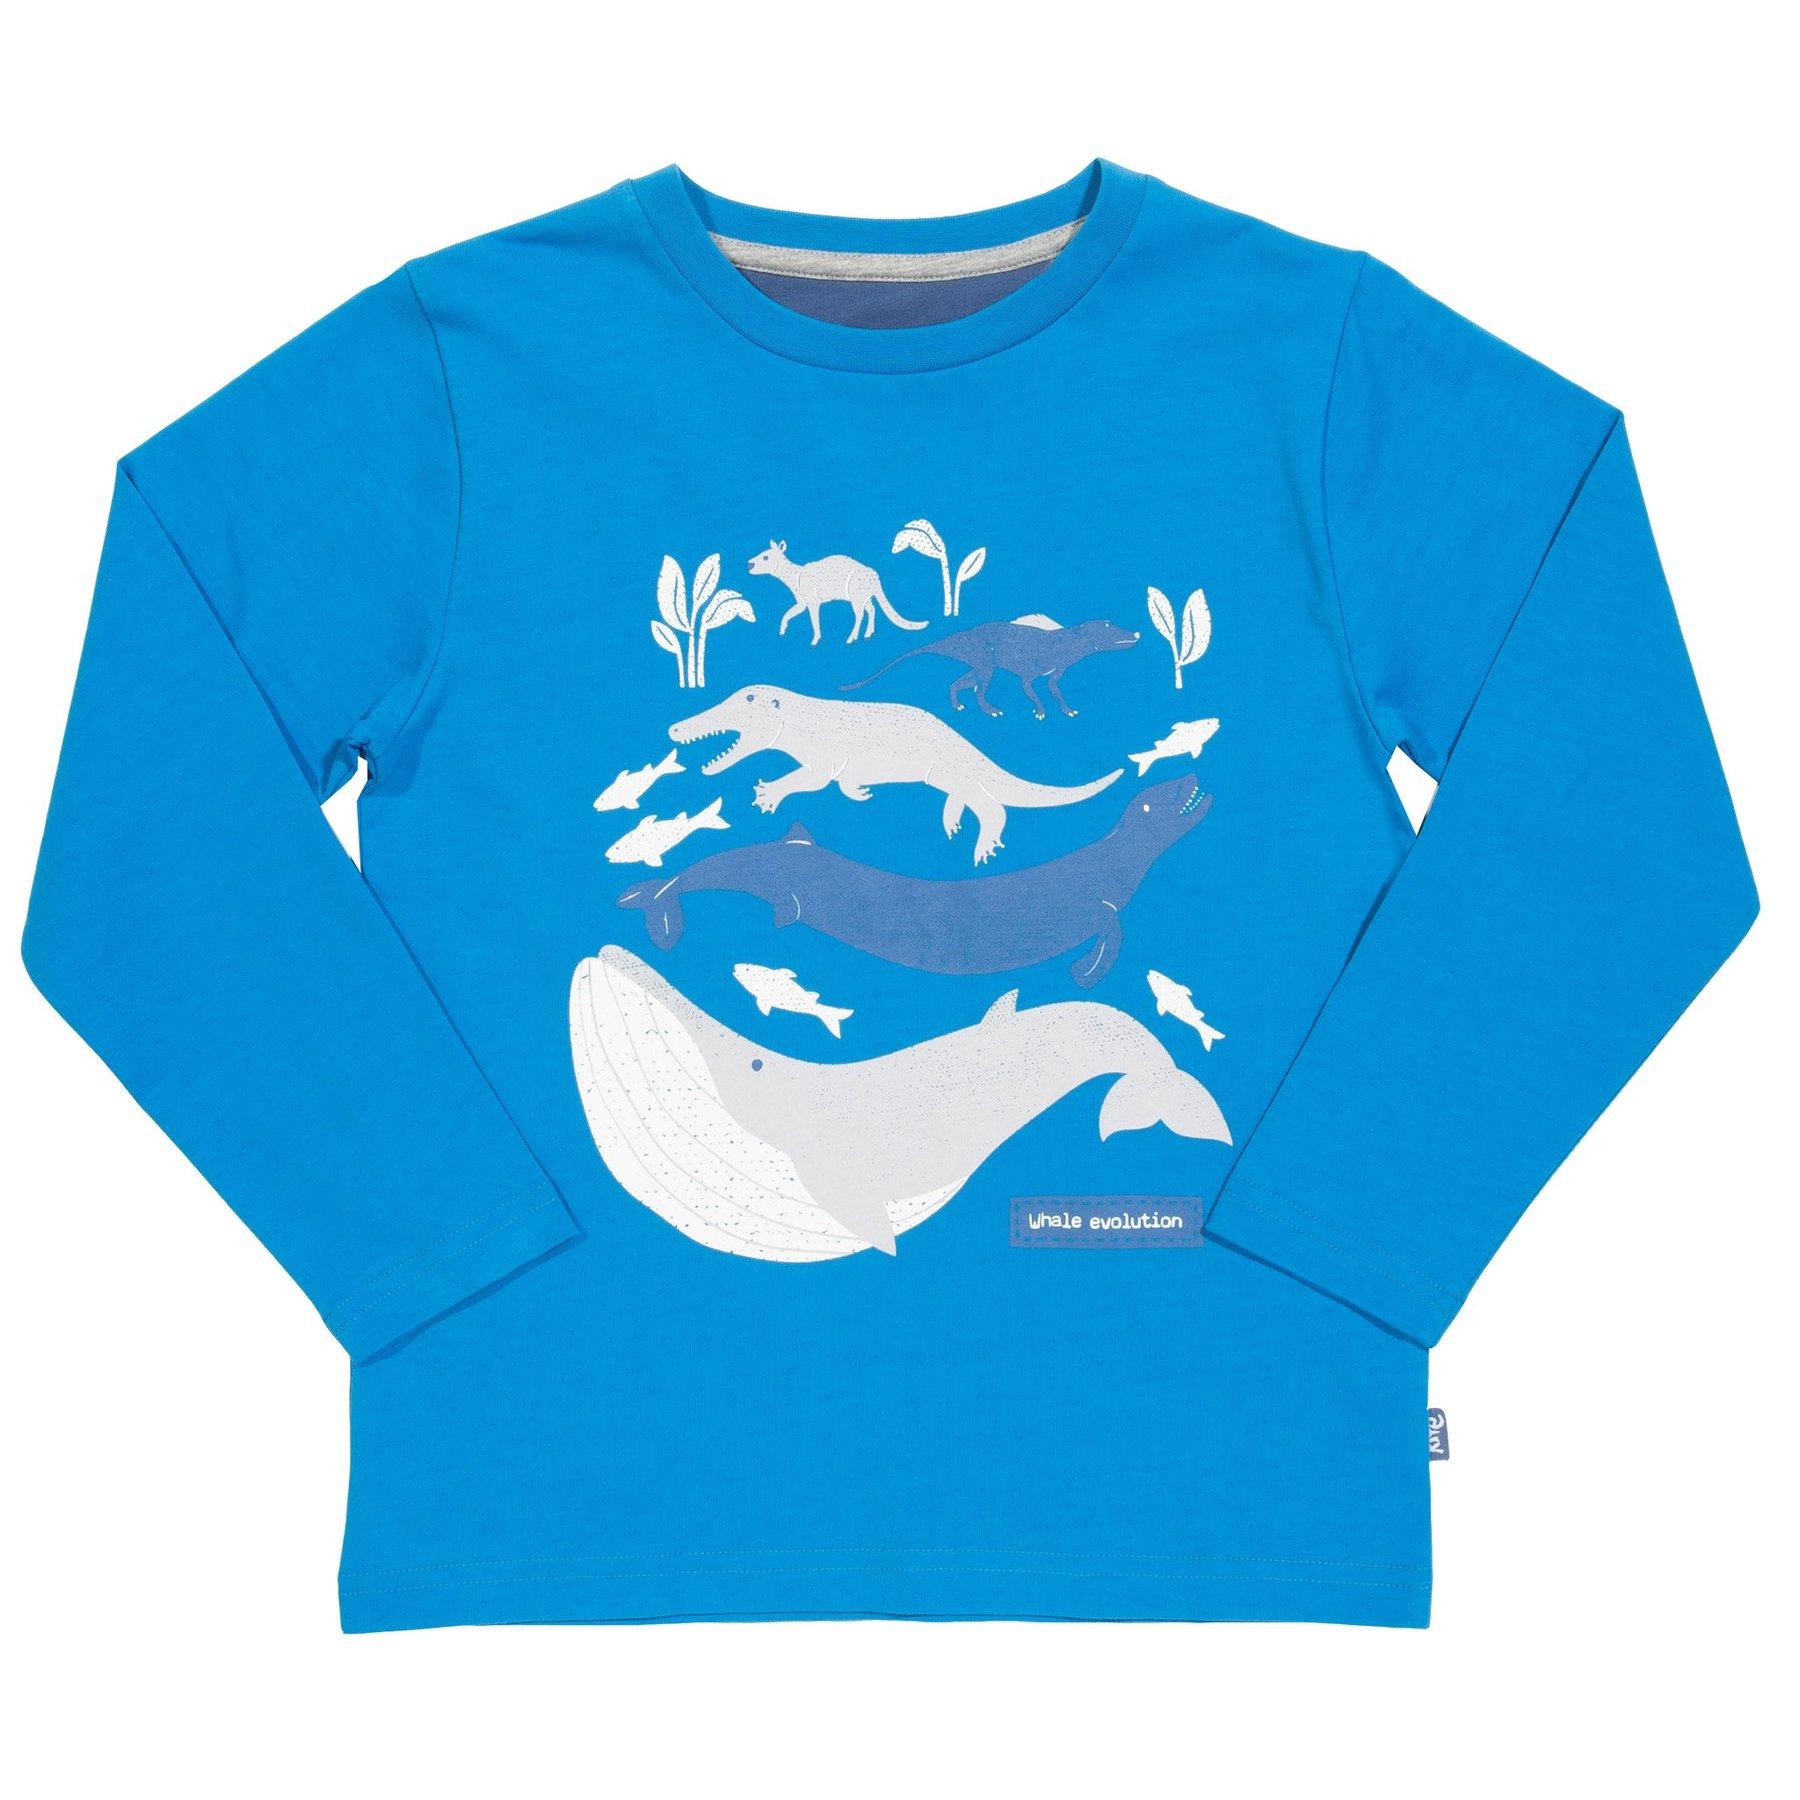 Kite Clothing Whale Evolution T-Shirt front